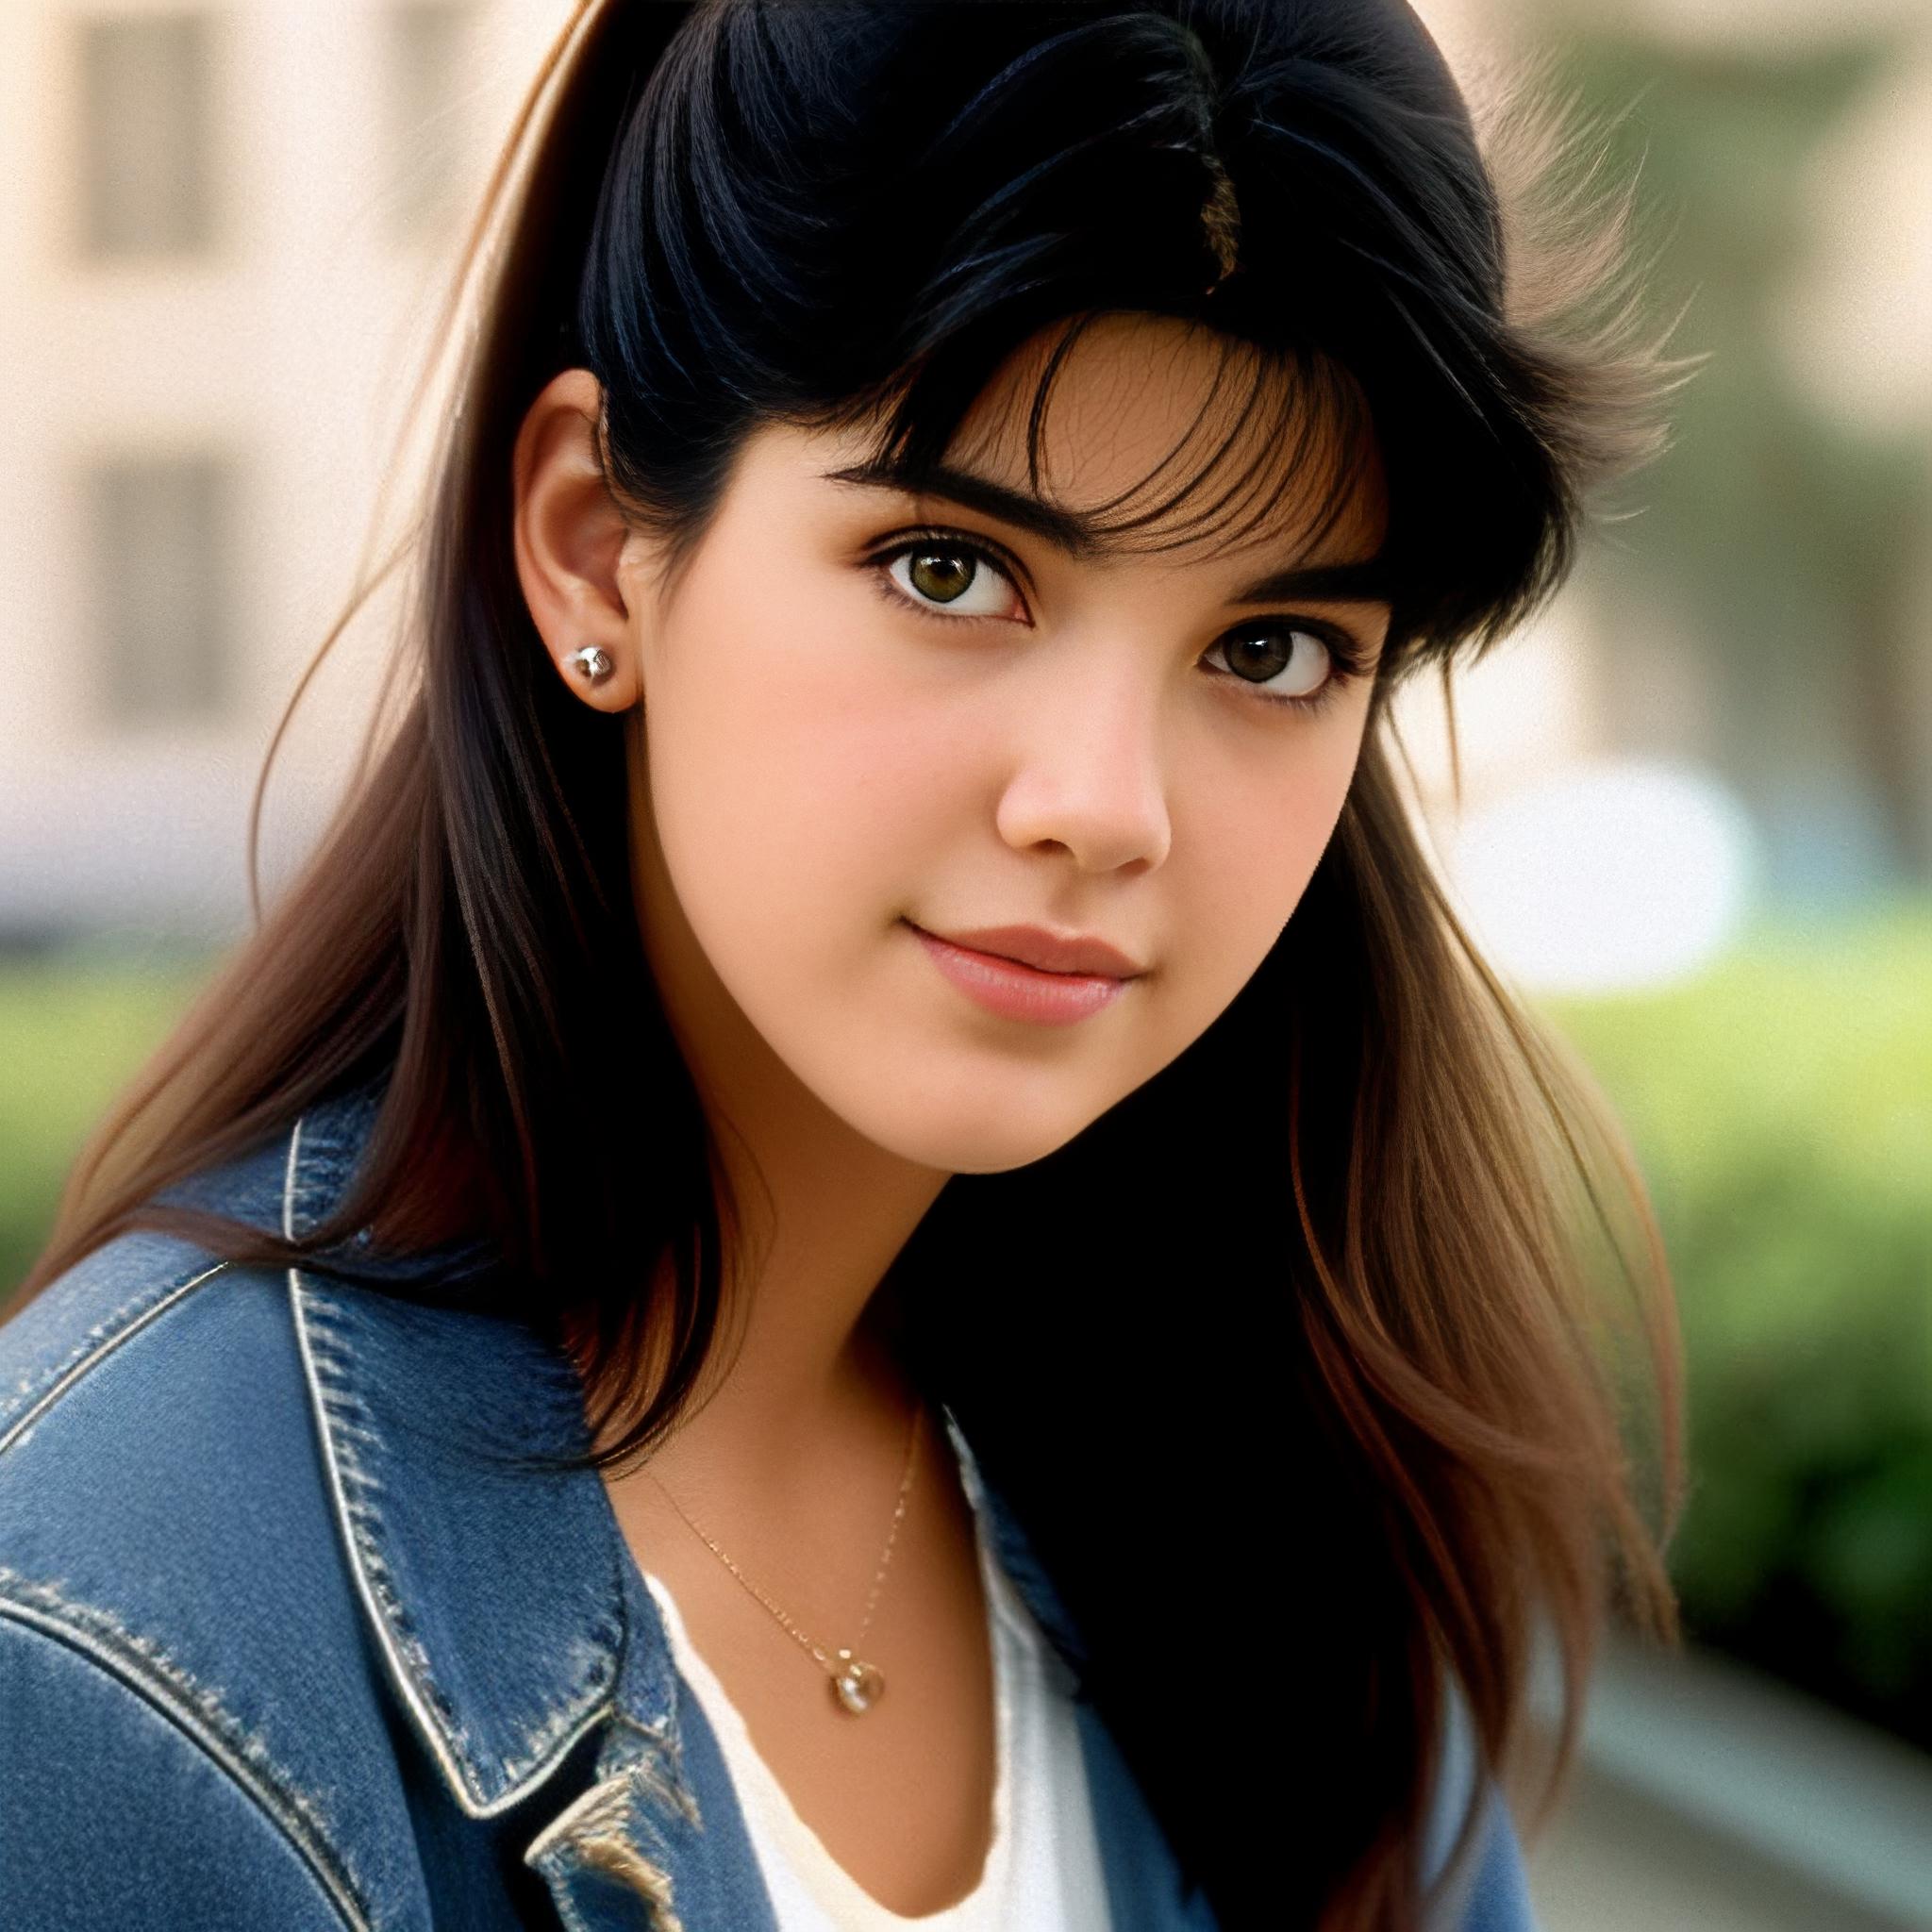 Phoebe Cates (Actress) image by helicalink